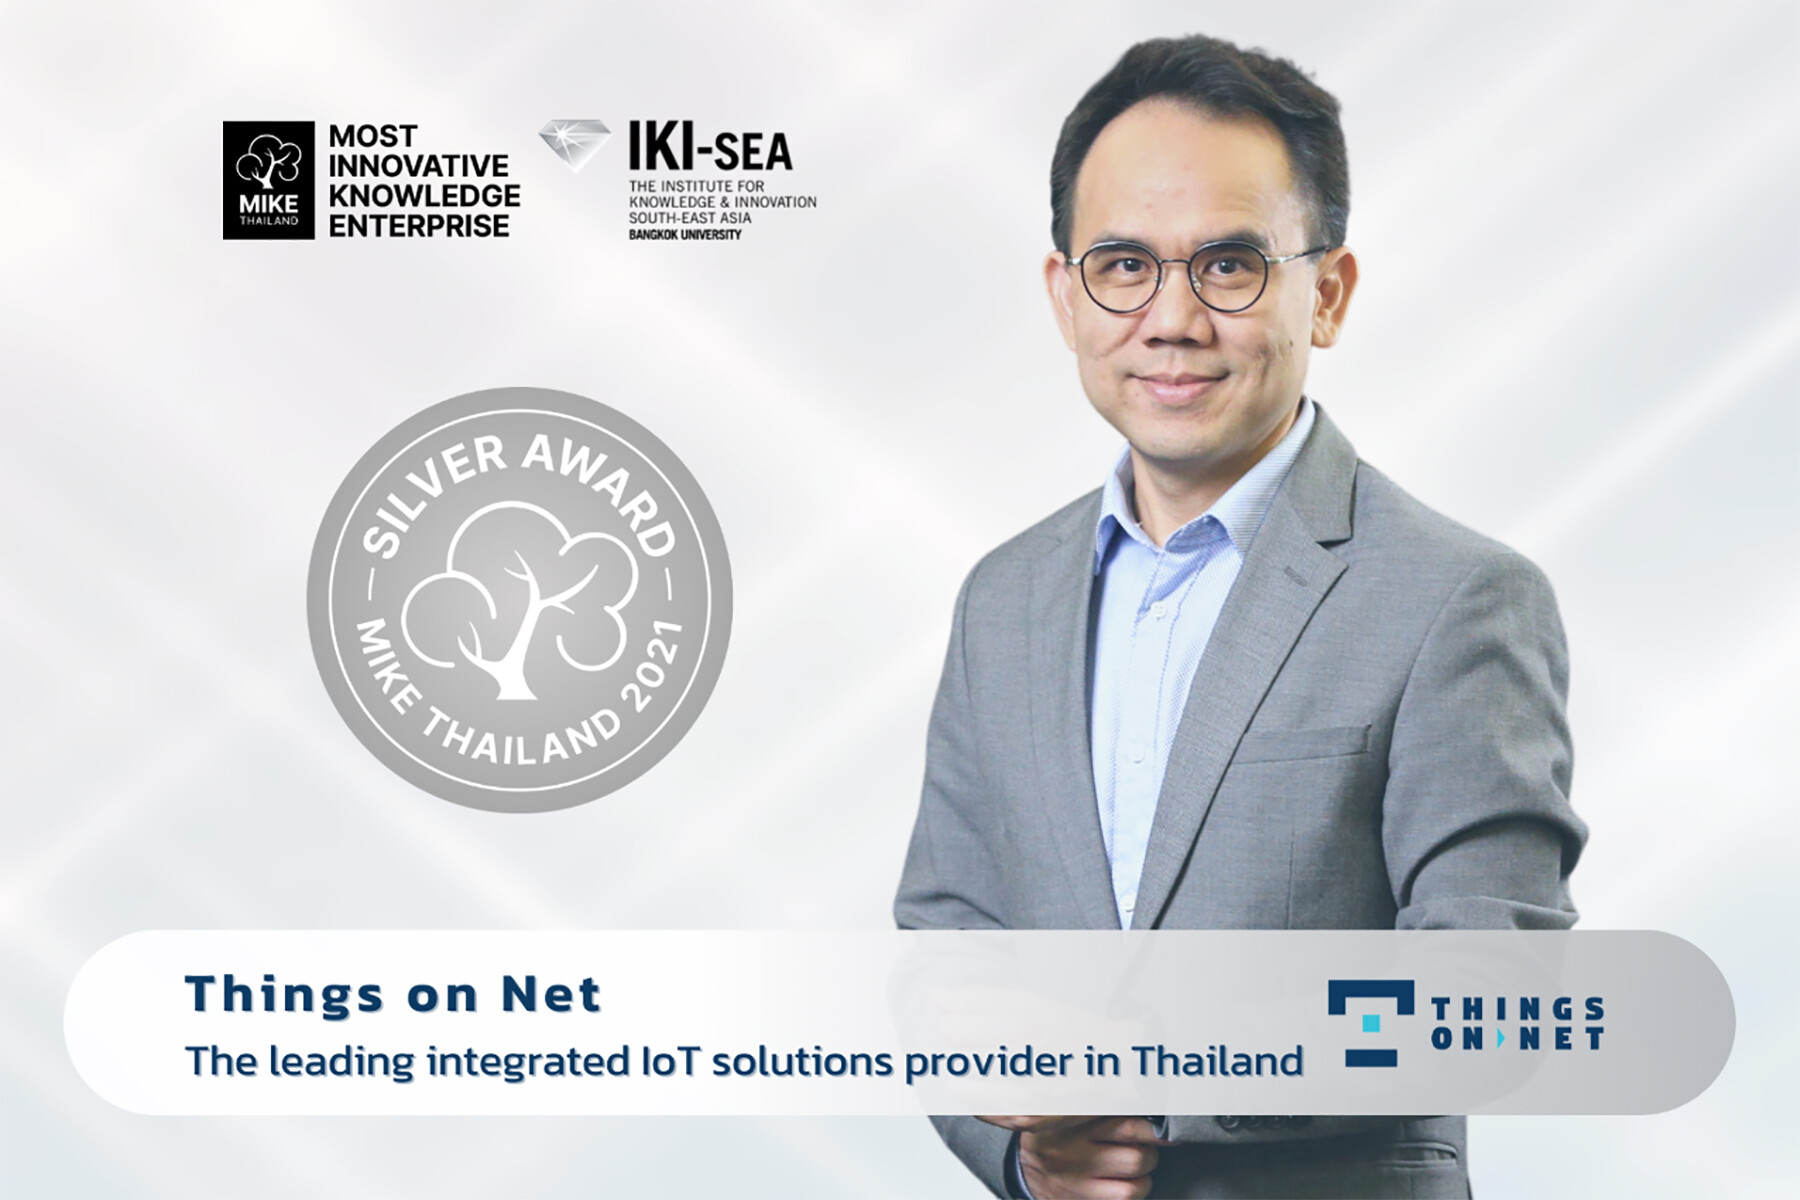 Things on Net wins the Most Innovative Knowledge Enterprise Award for 2021